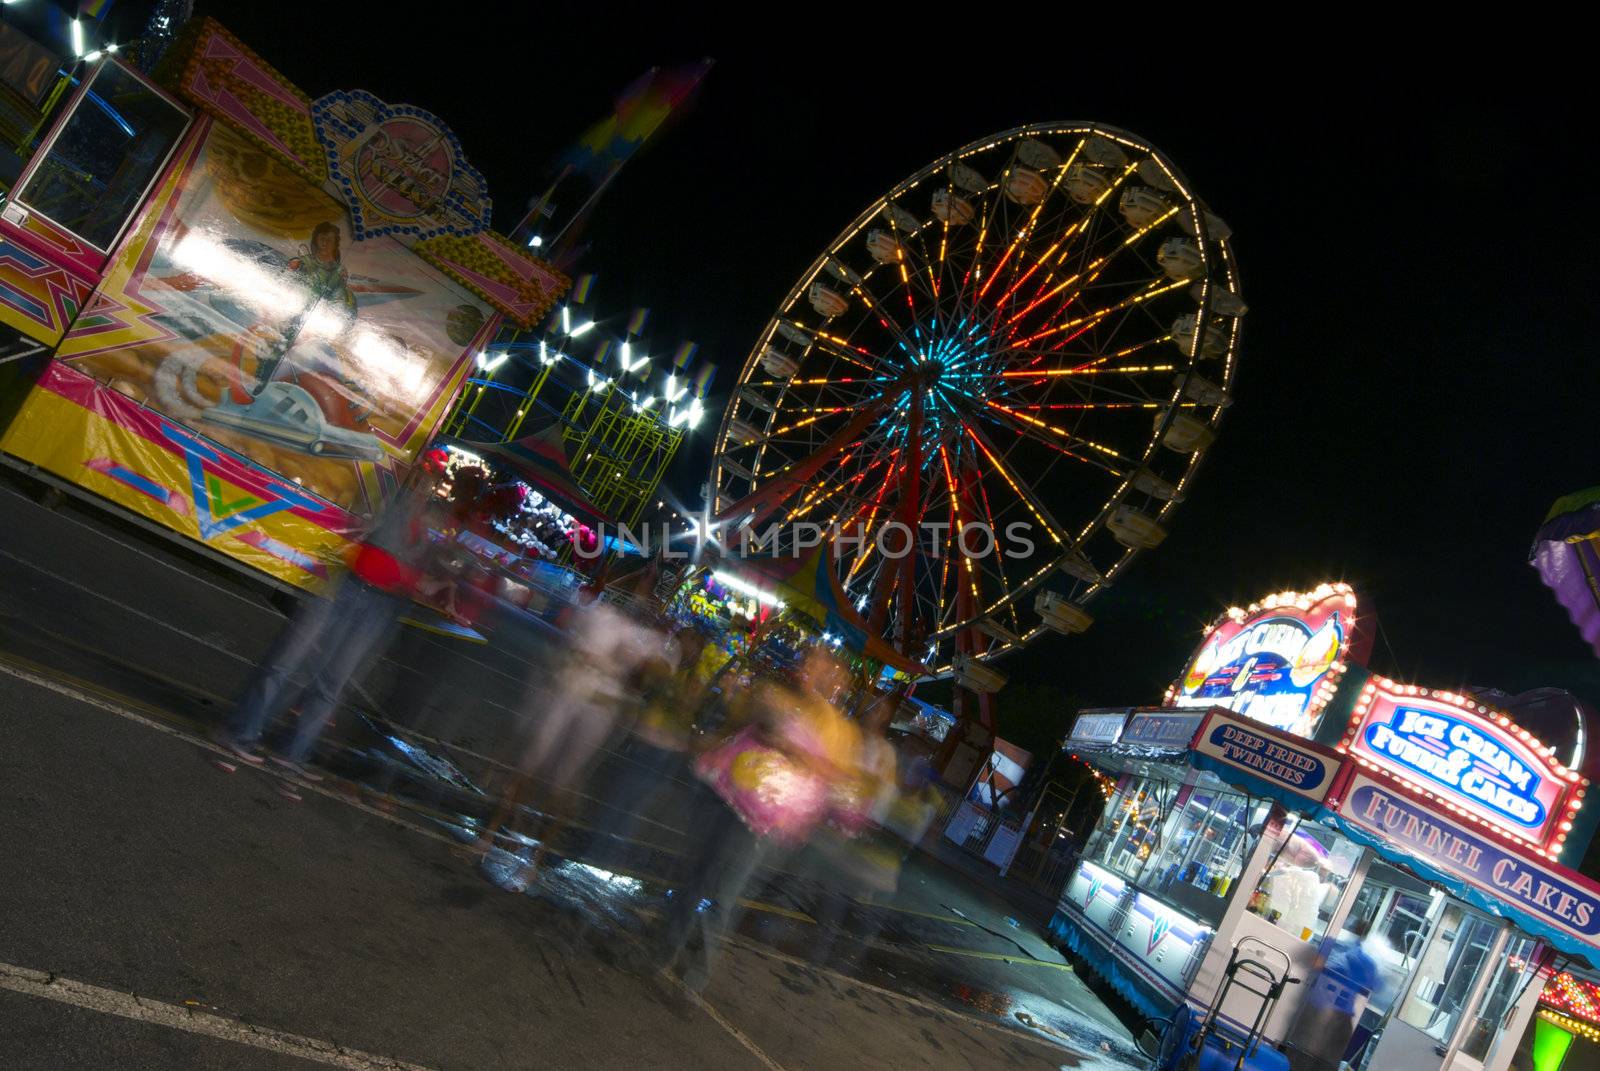 A group of friends wanders through a colorful carnival at night